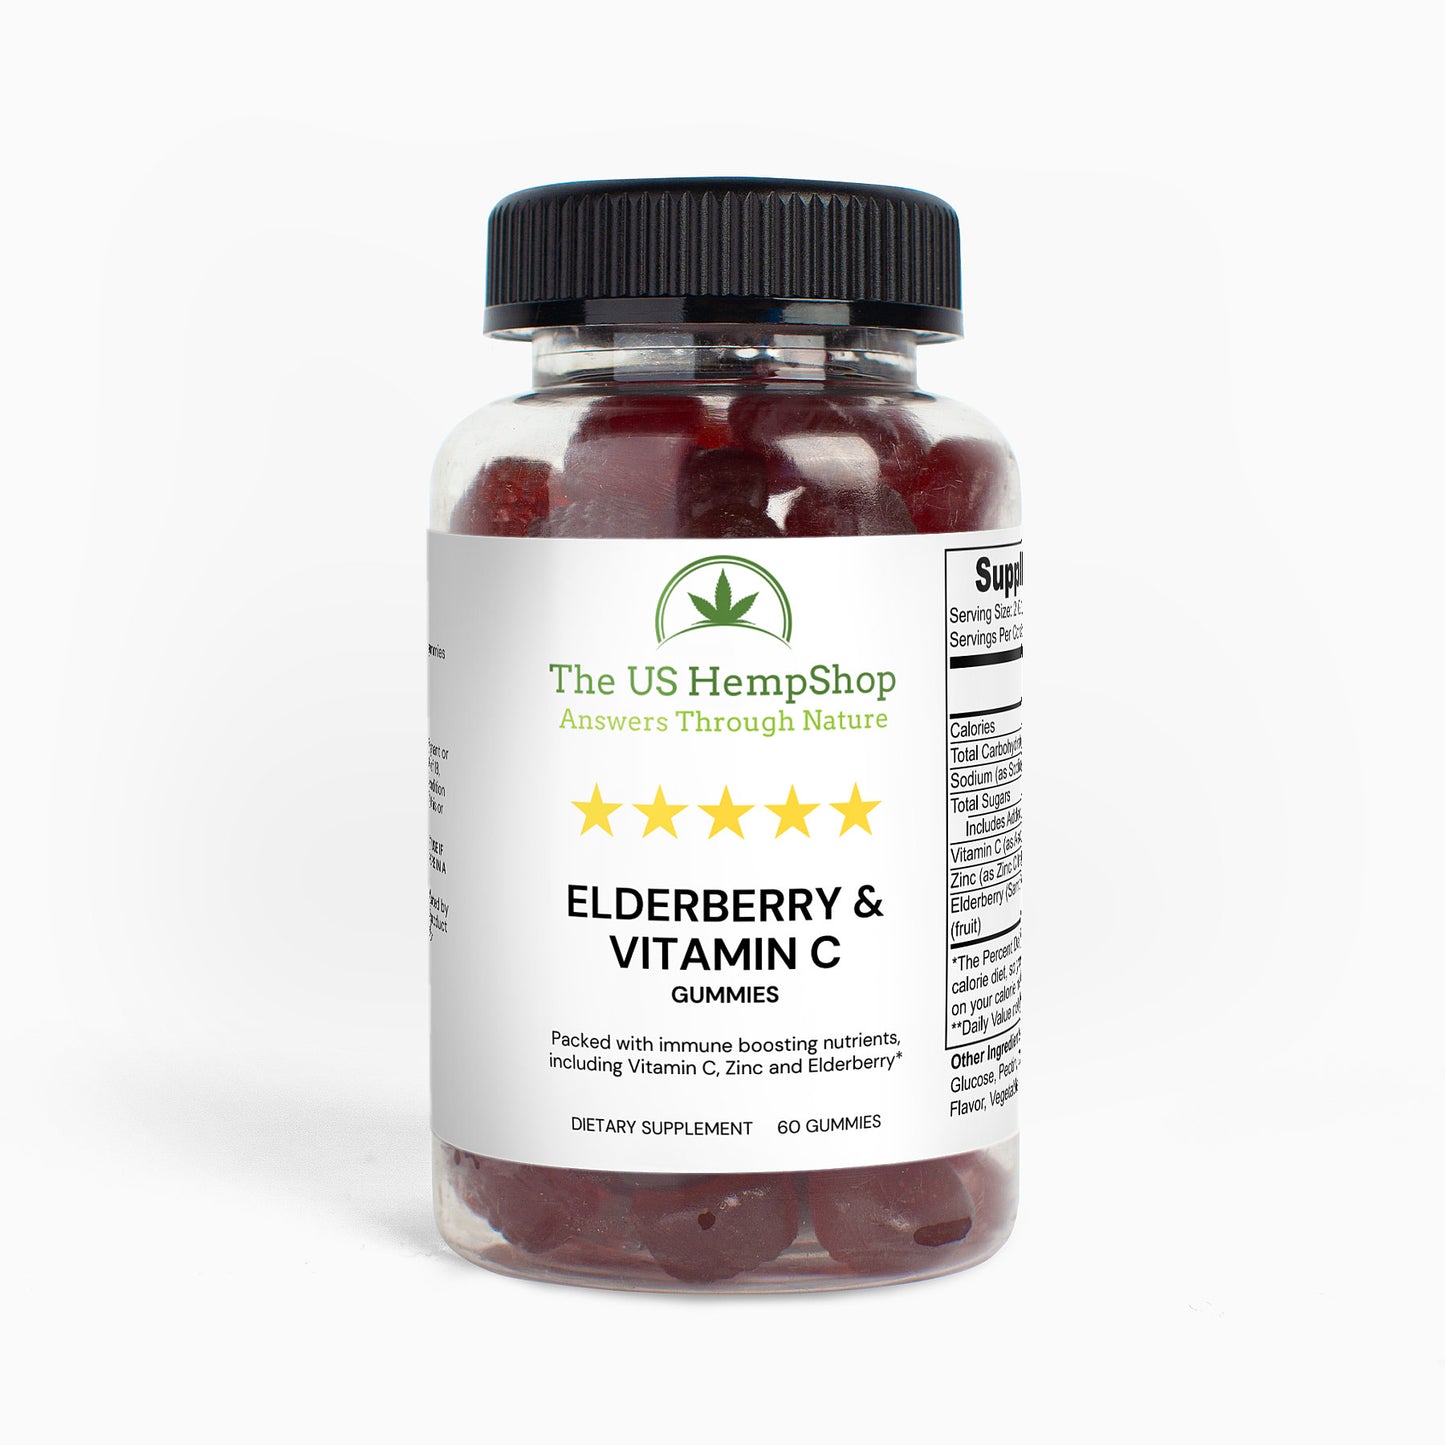 Elderberry and Vitamin C from US Hemp Shop will help boost the immune system as nature intended.